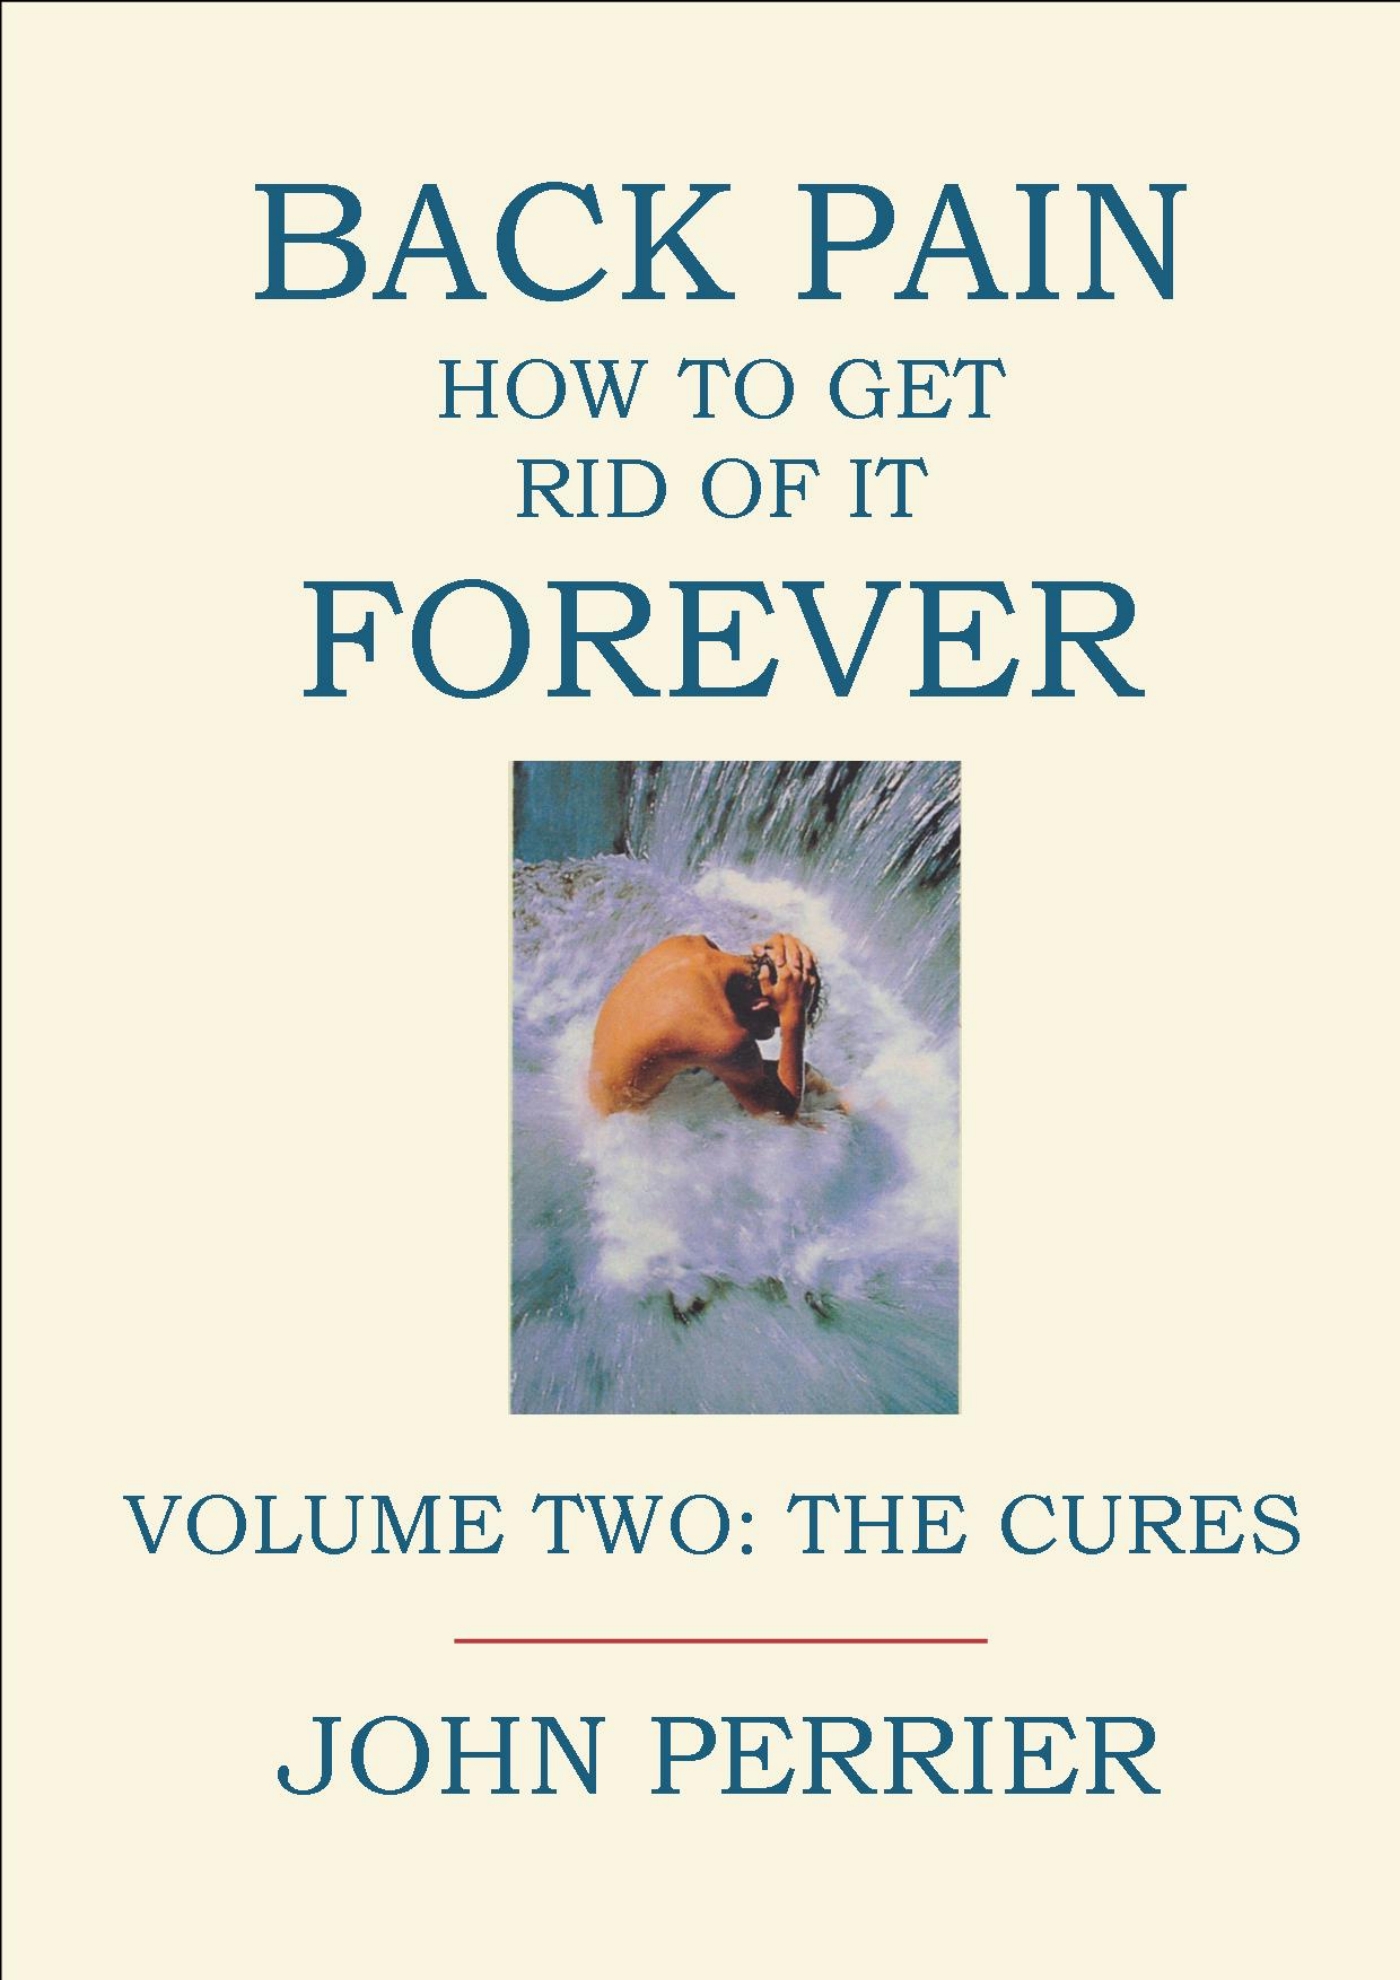 Back Pain: How to Get Rid of It Forever (Volume 2: The Cures)